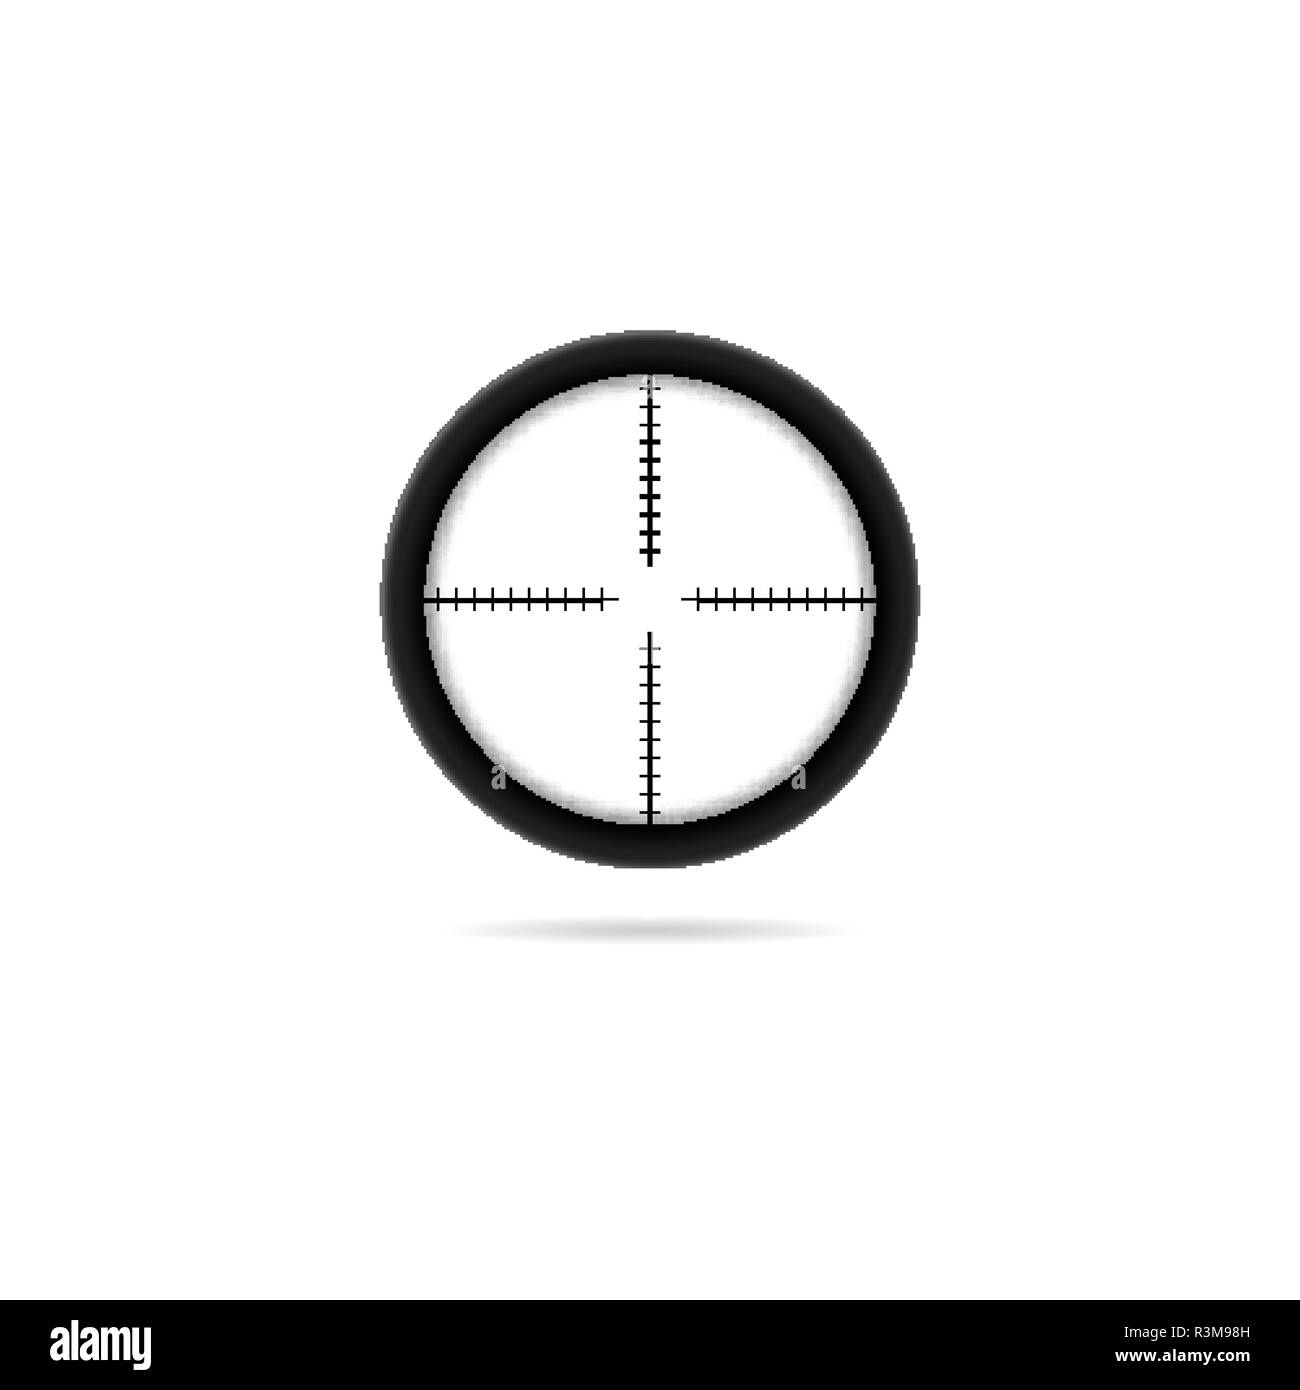 Sniper target crosshairs scope icon isolated on white background Stock Vector